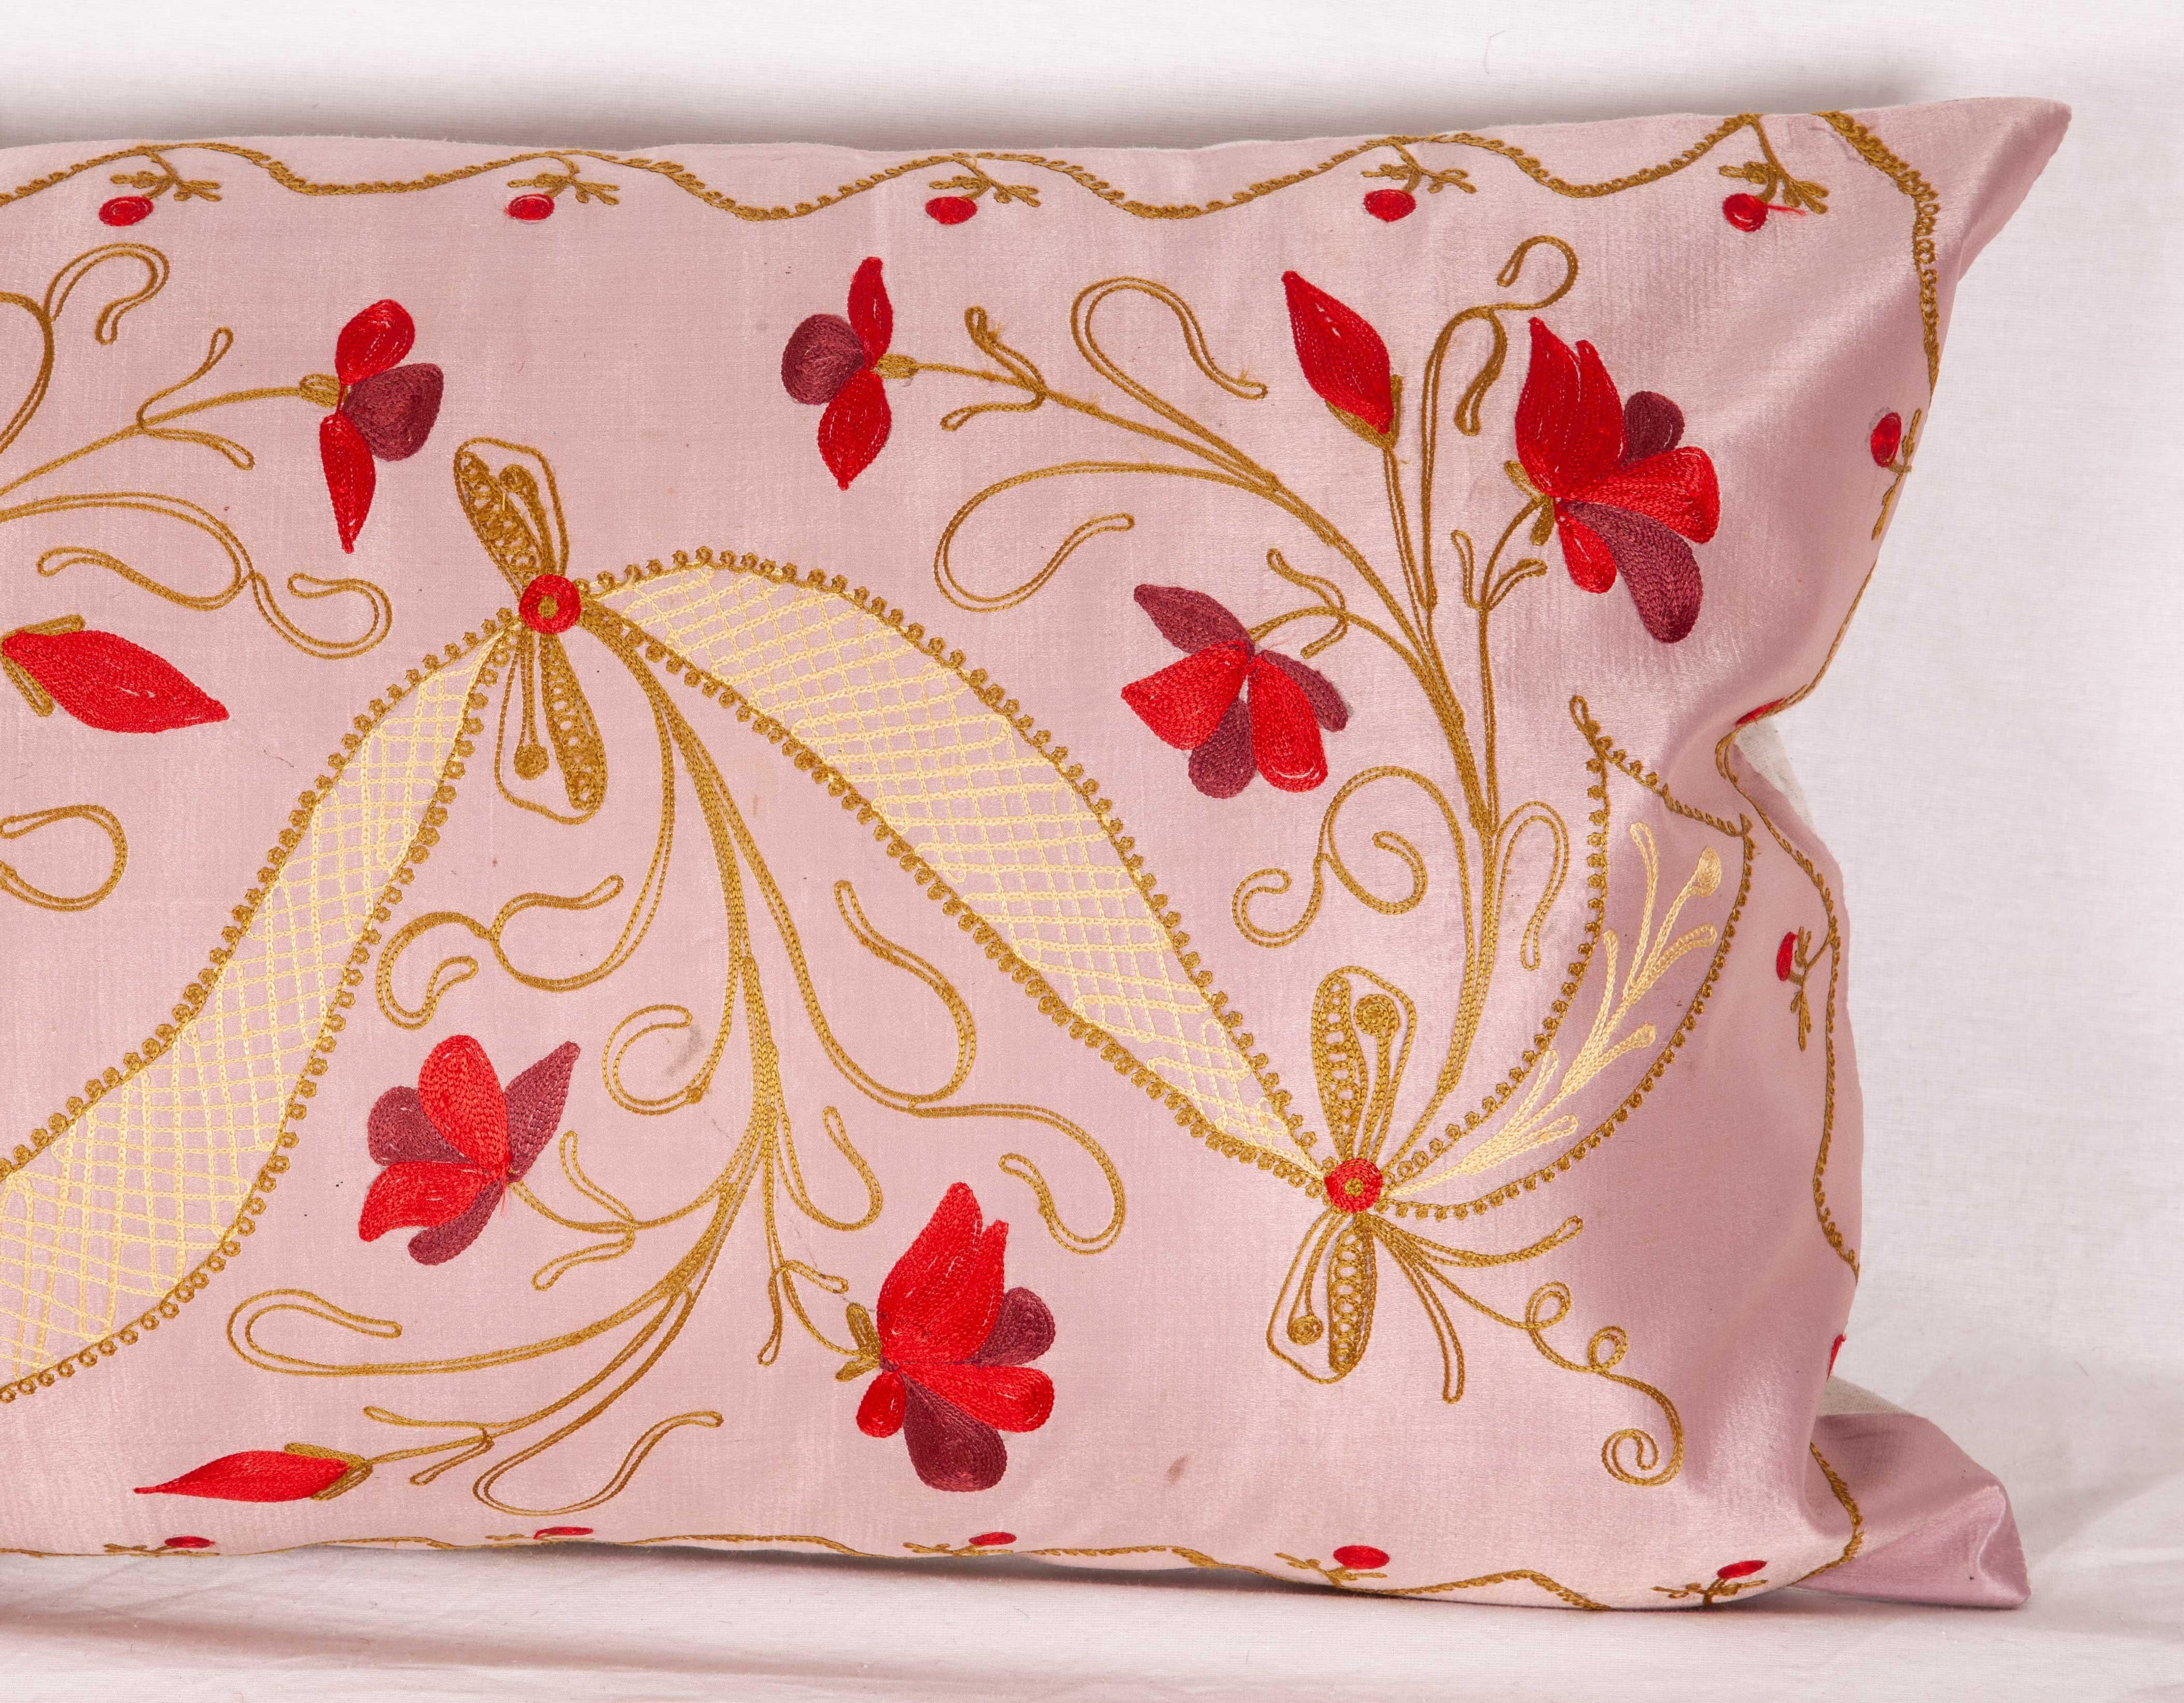 Embroidered Large Pillow Case Fashioned from a Early 20th Century Syrian Divan Cover